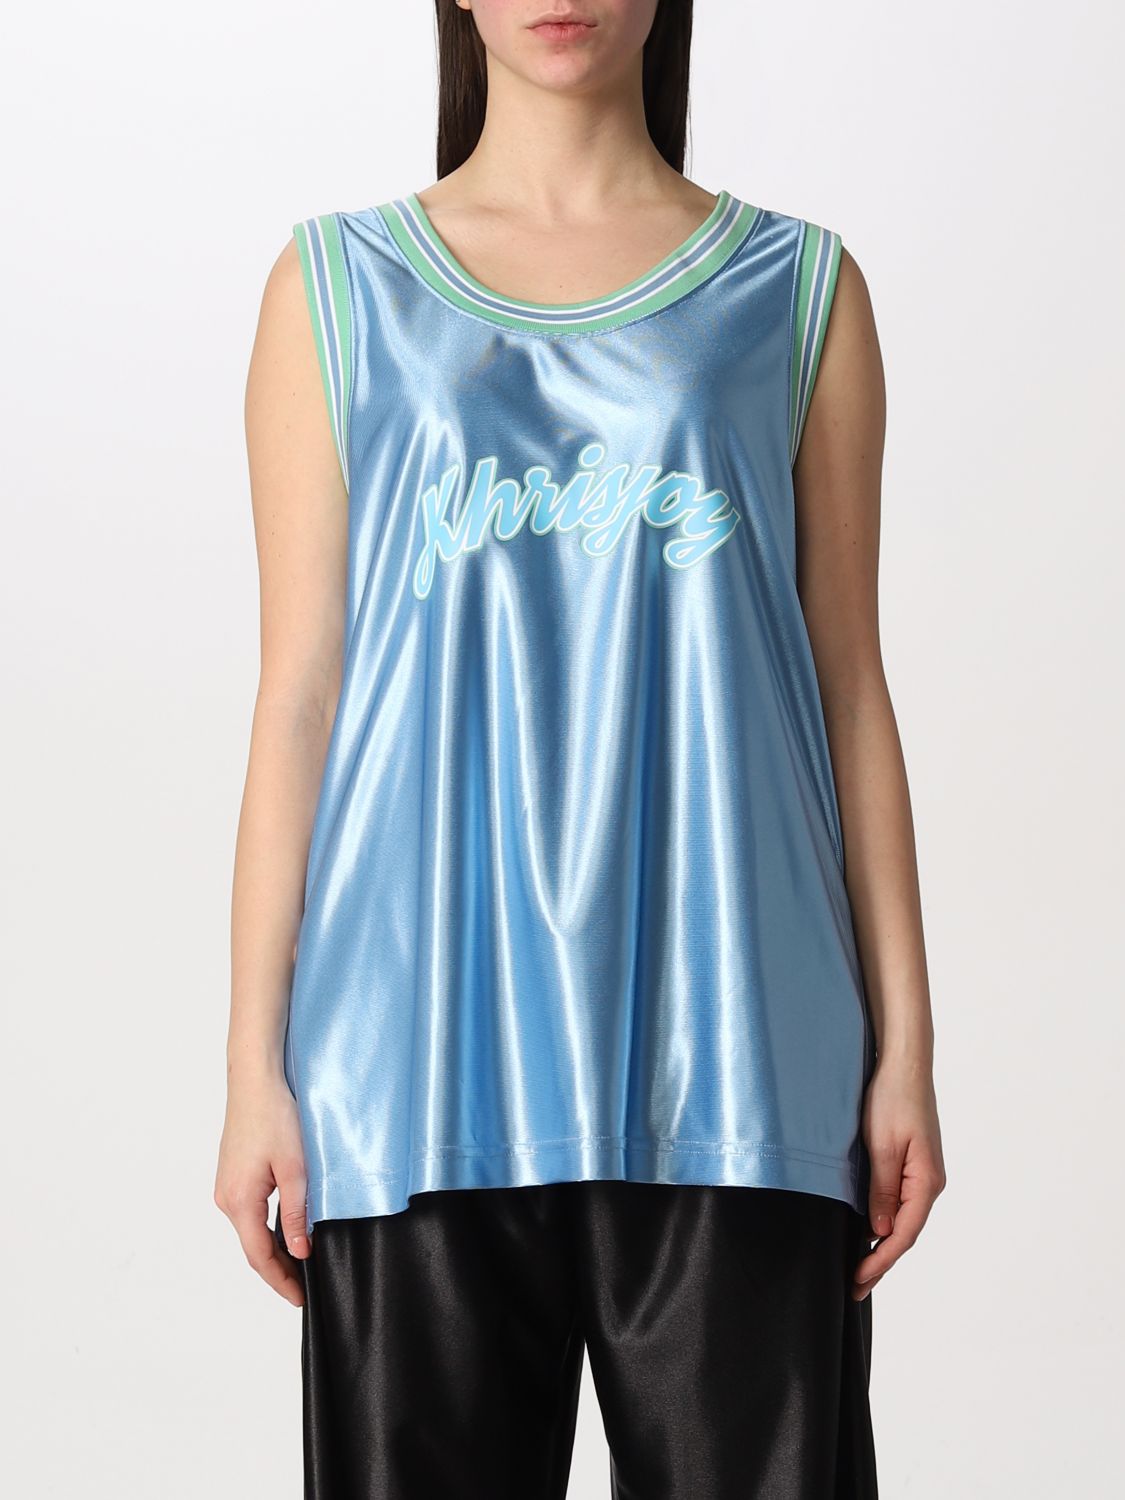 Khrisjoy Tops  Women Color Turquoise